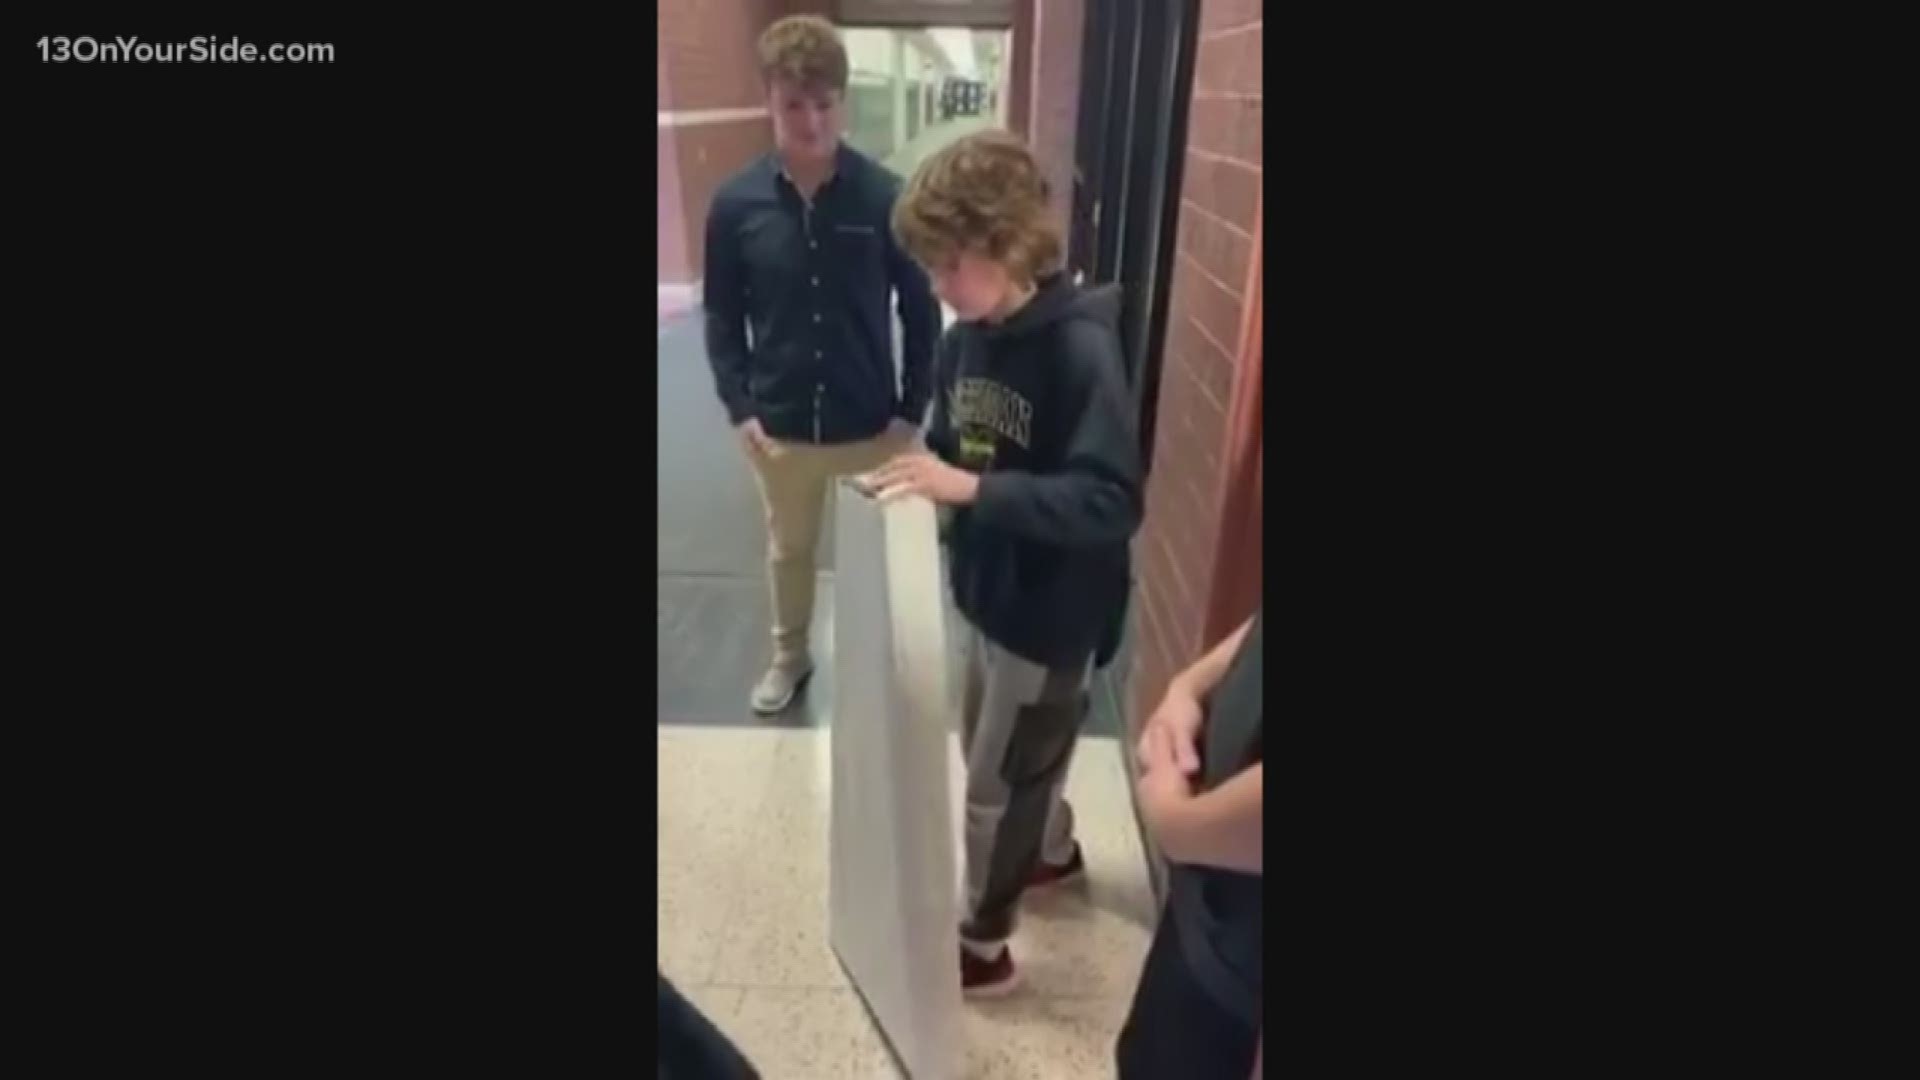 A group of Reeths-Puffer students decided to do something kind and get a peer a guitar.